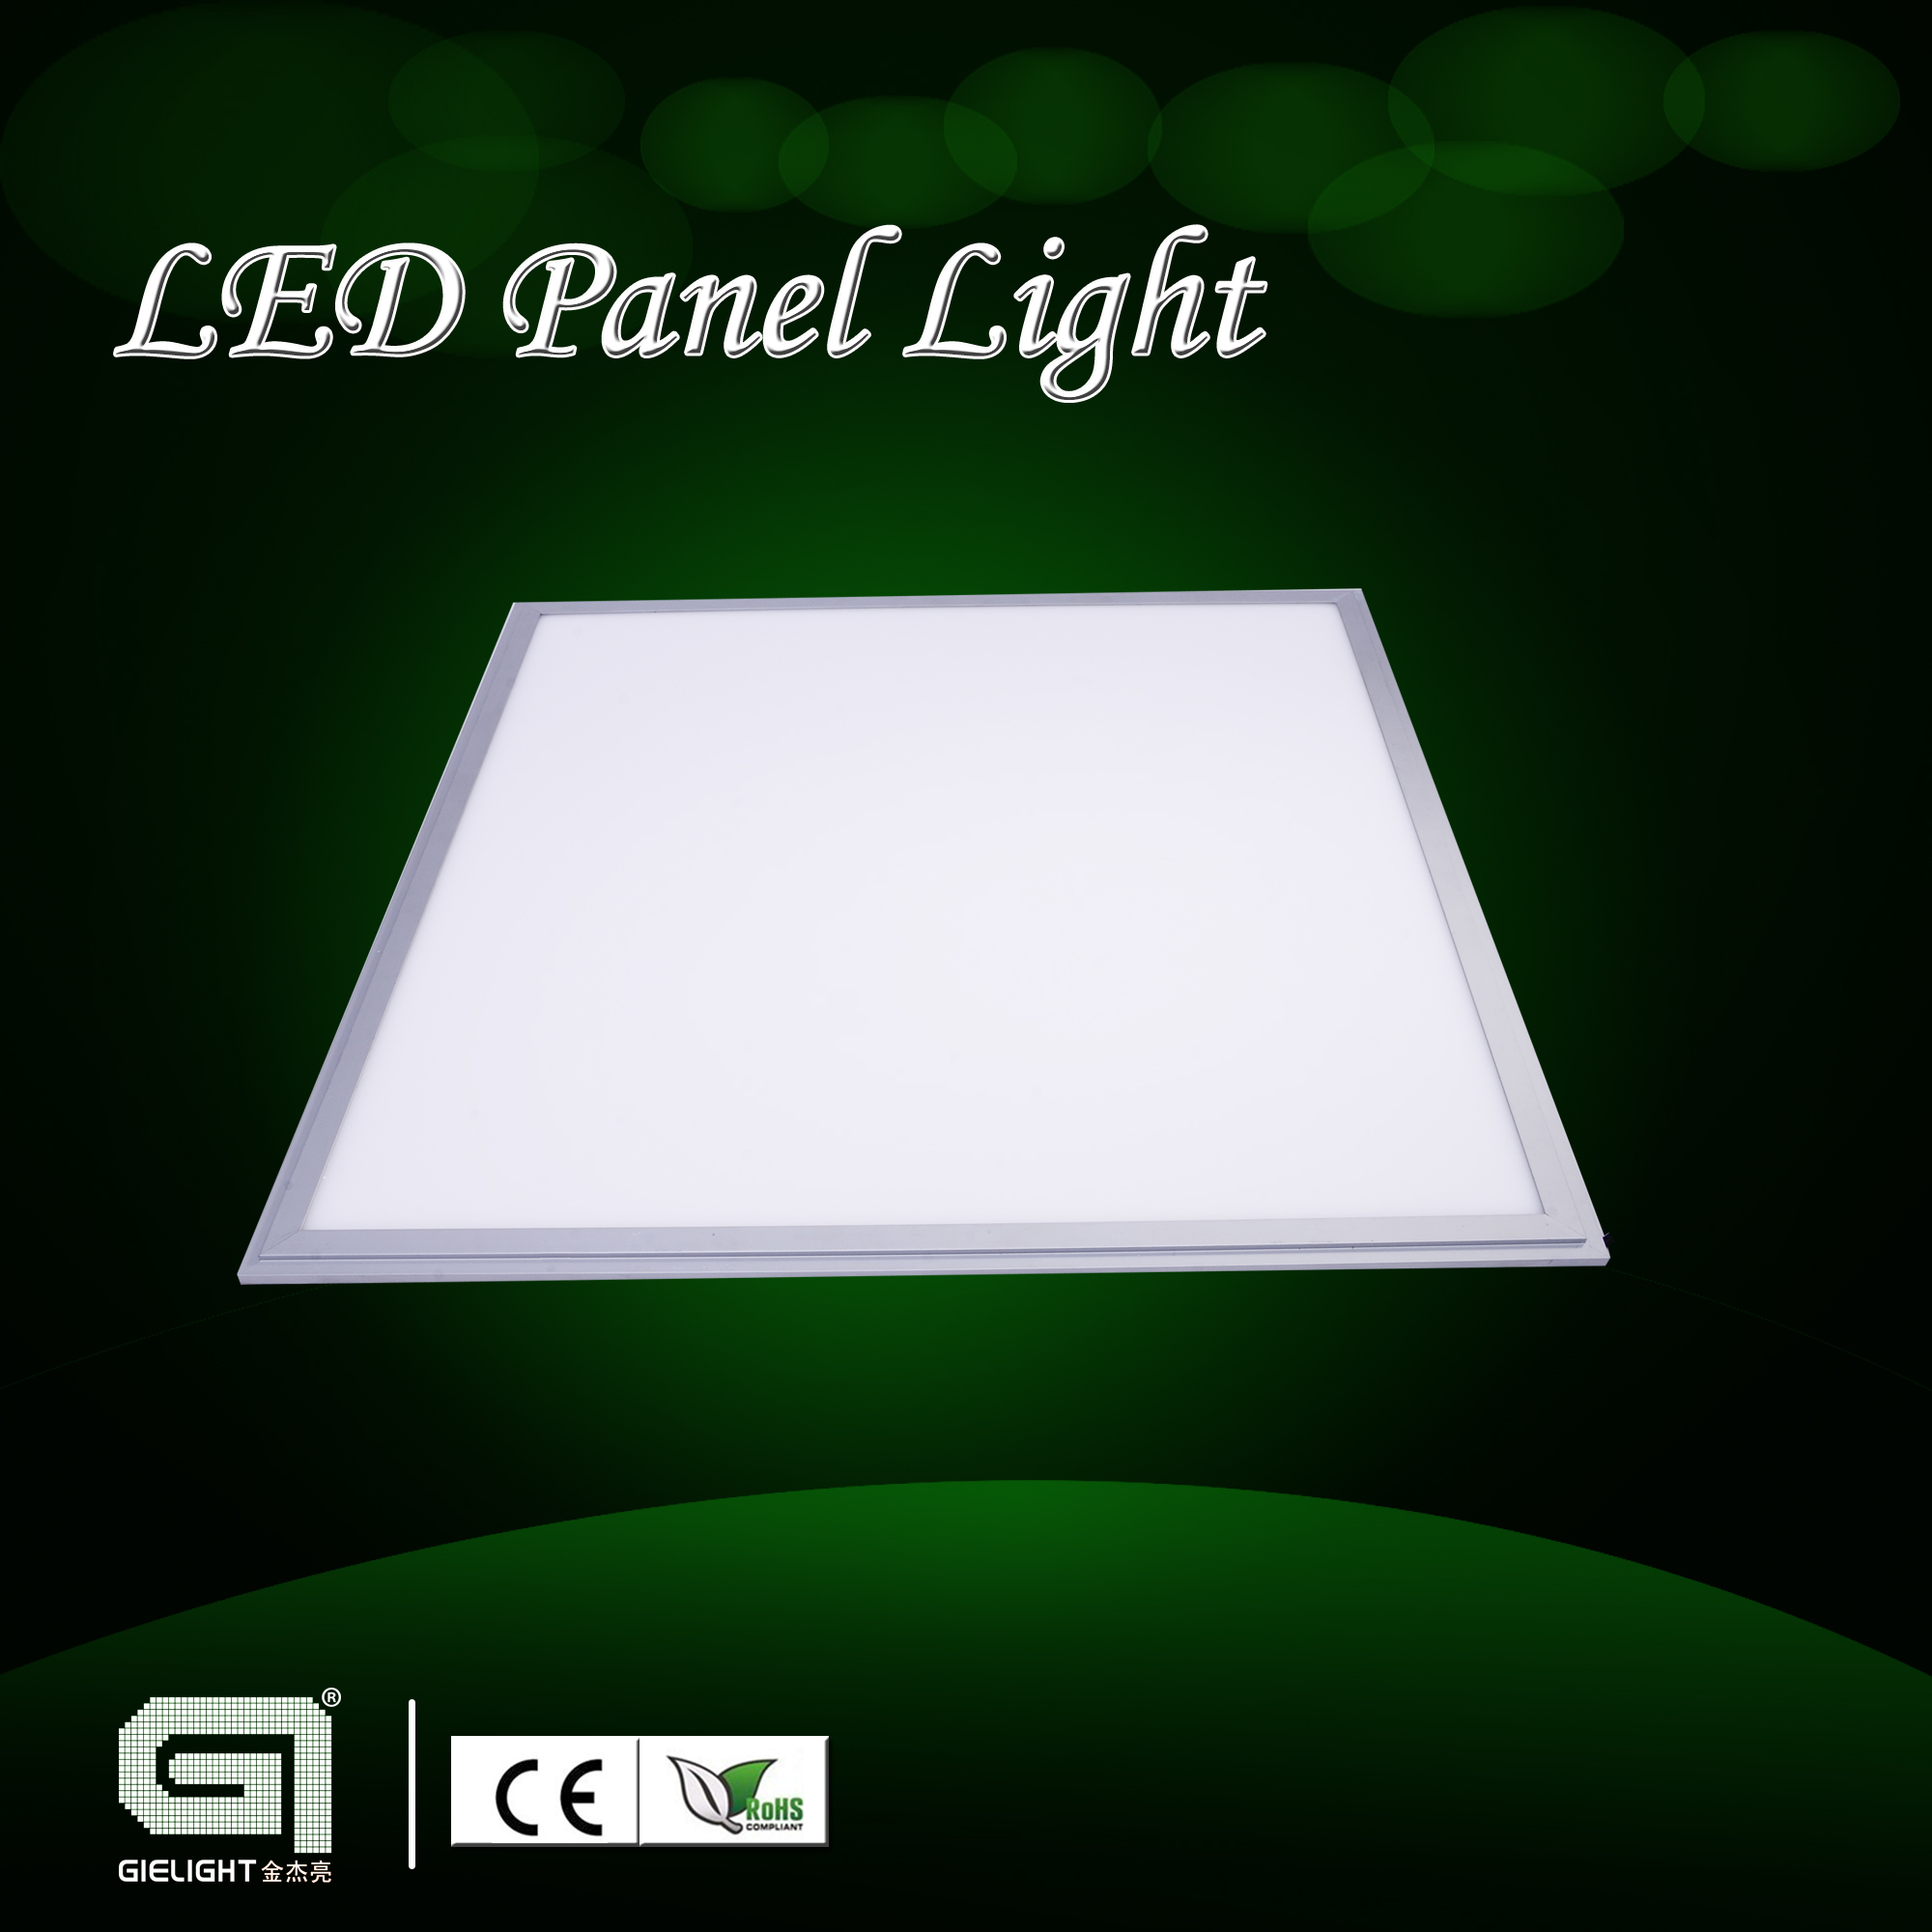 UL led light panel 600*600mm 43w recessed, suspended, mounted, office light